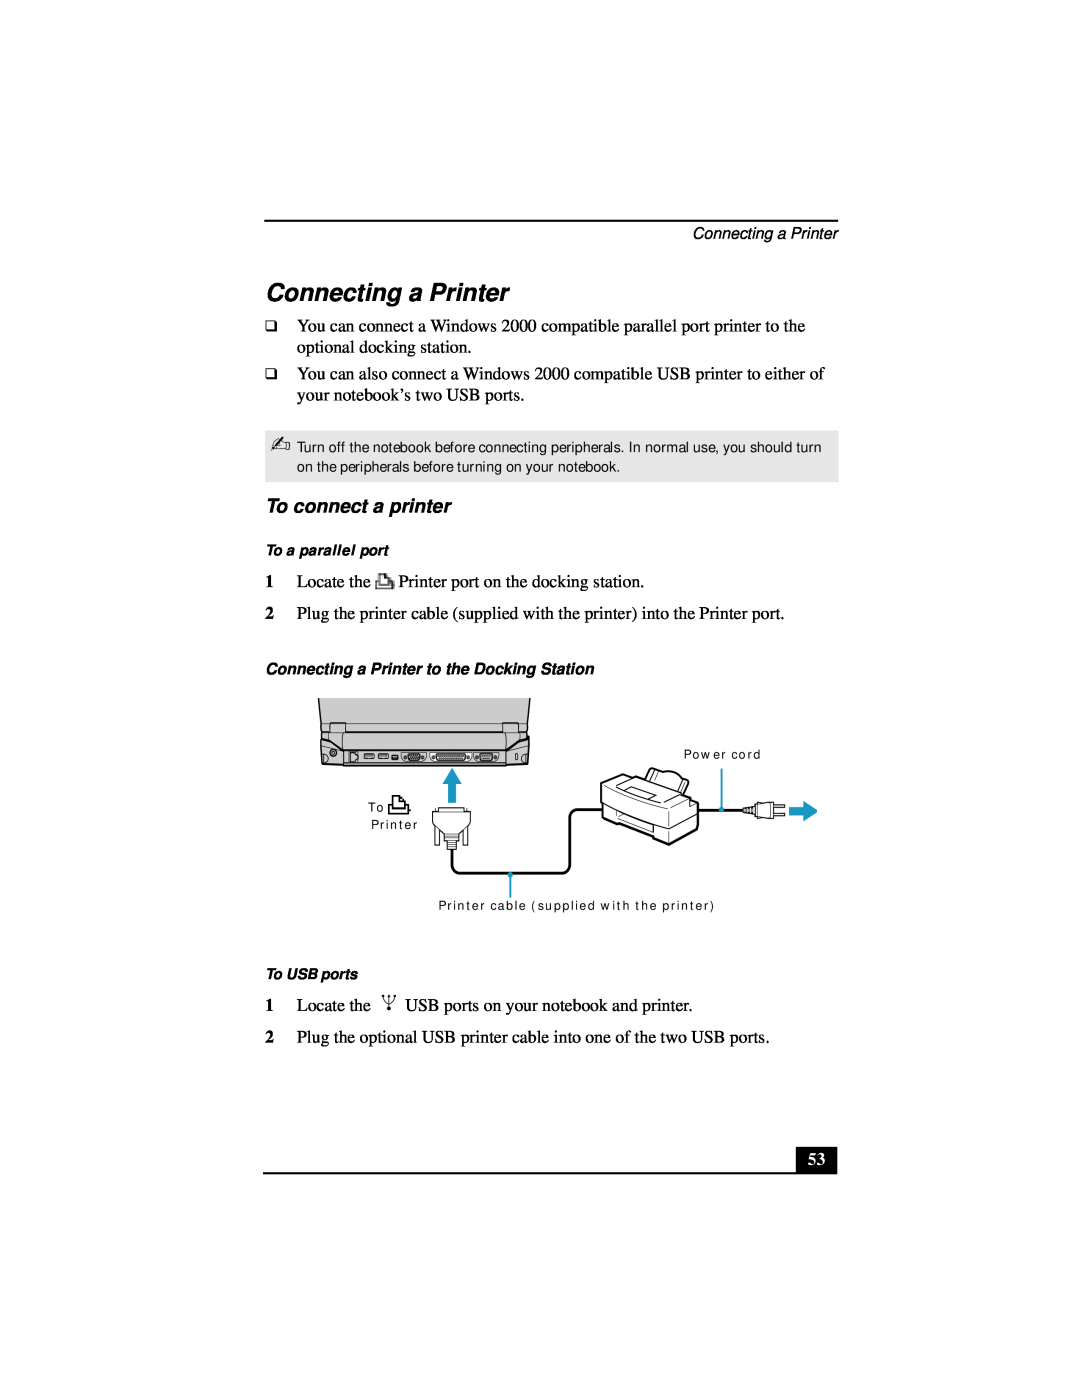 Sony Notebook Computer manual Connecting a Printer, To connect a printer, To a parallel port, To USB ports 